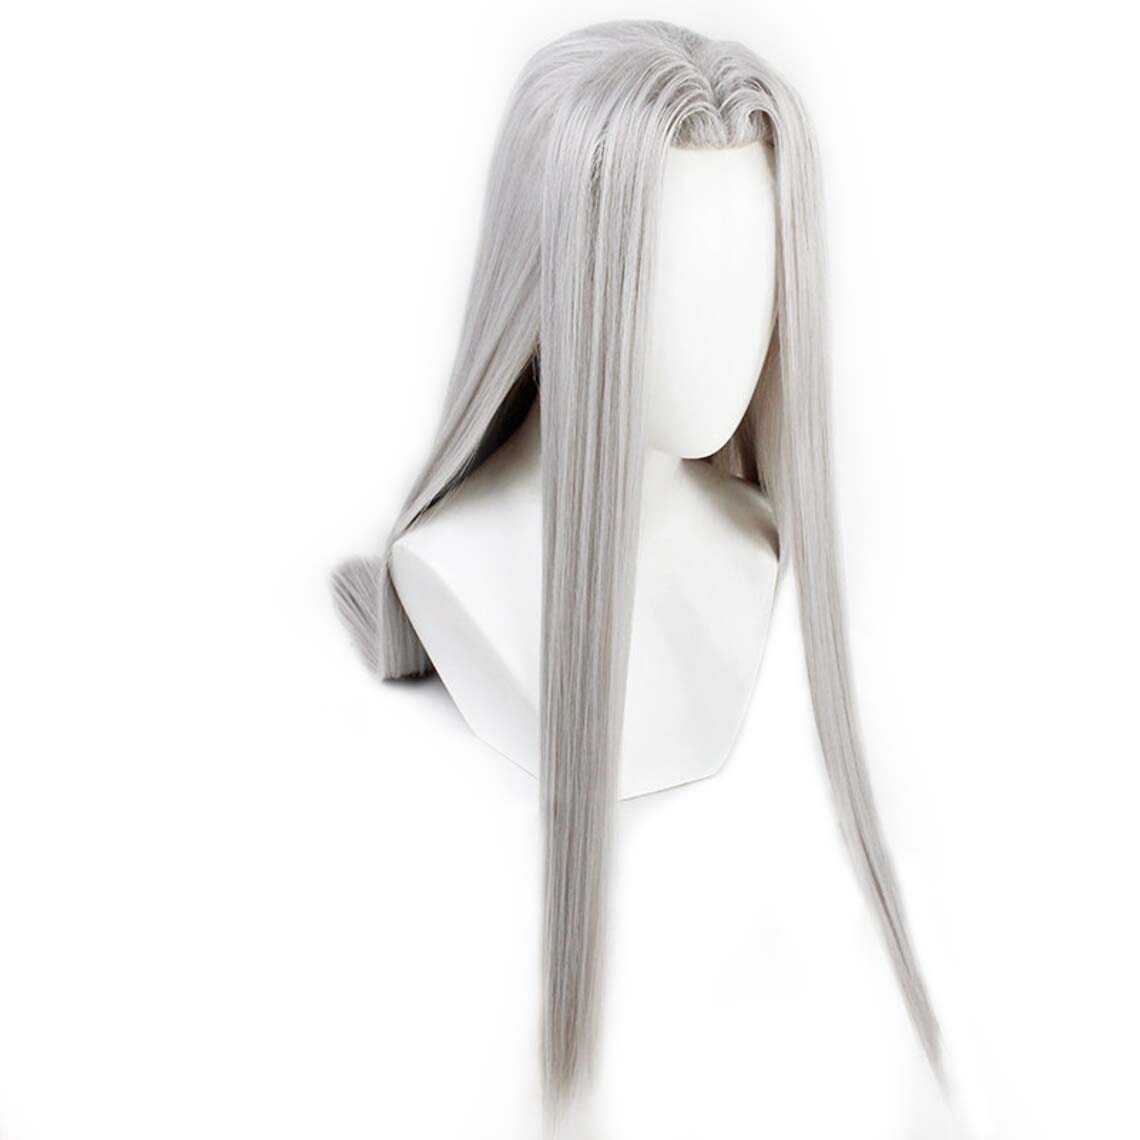 Transform into the Legendary Villain with the Sephiroth Wig - Perfect for Cosplay and Final Fantasy Fans